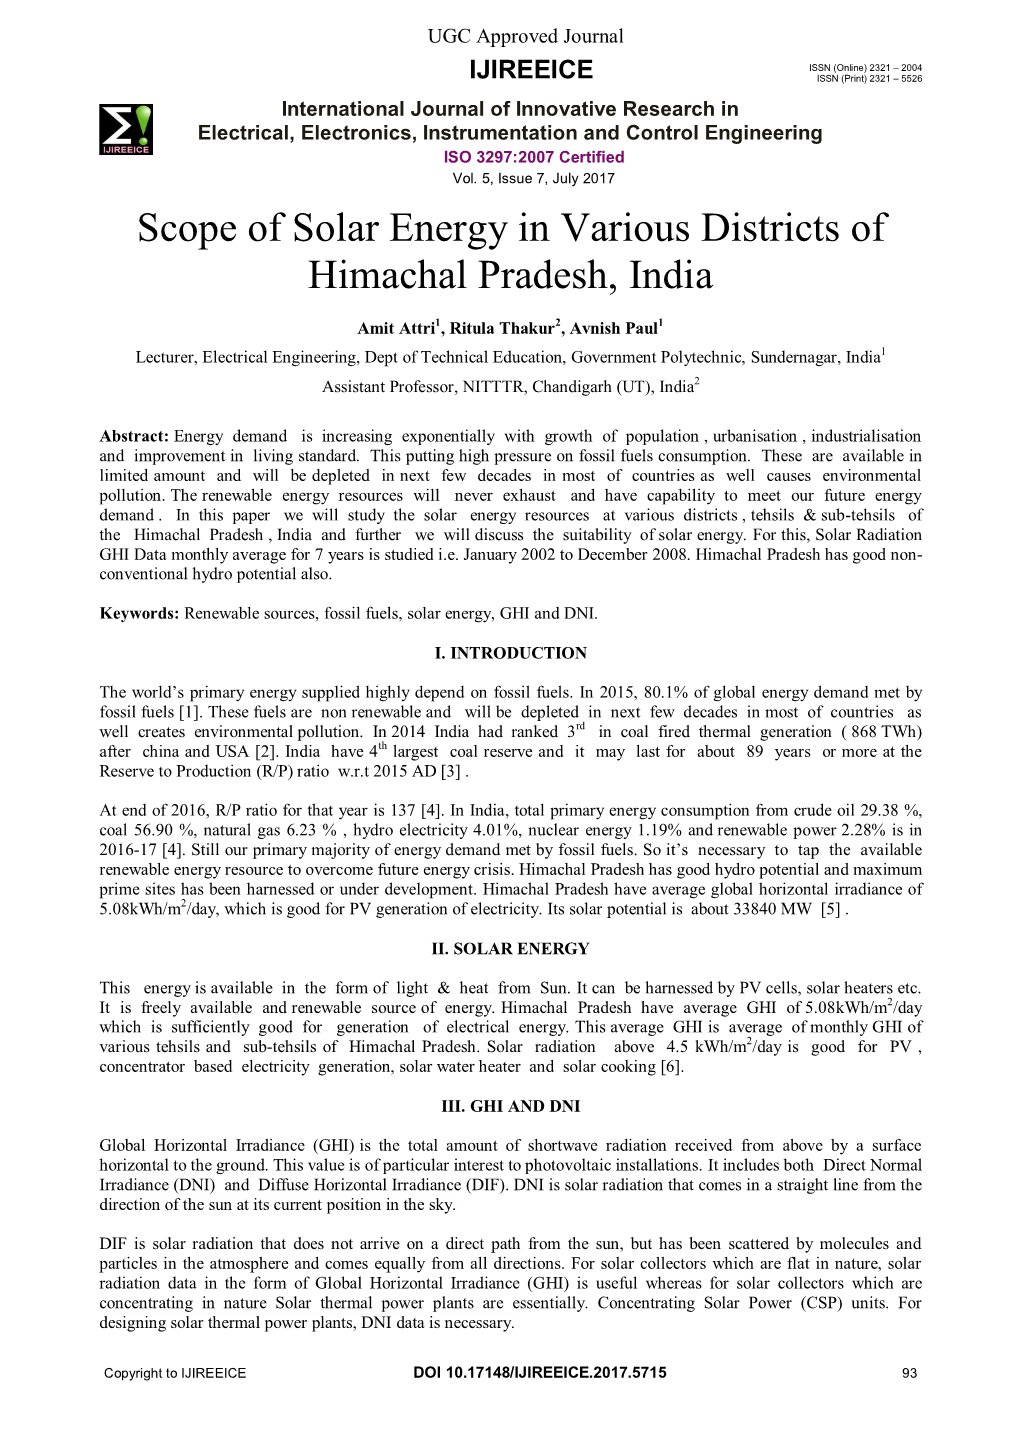 Scope of Solar Energy in Various Districts of Himachal Pradesh, India